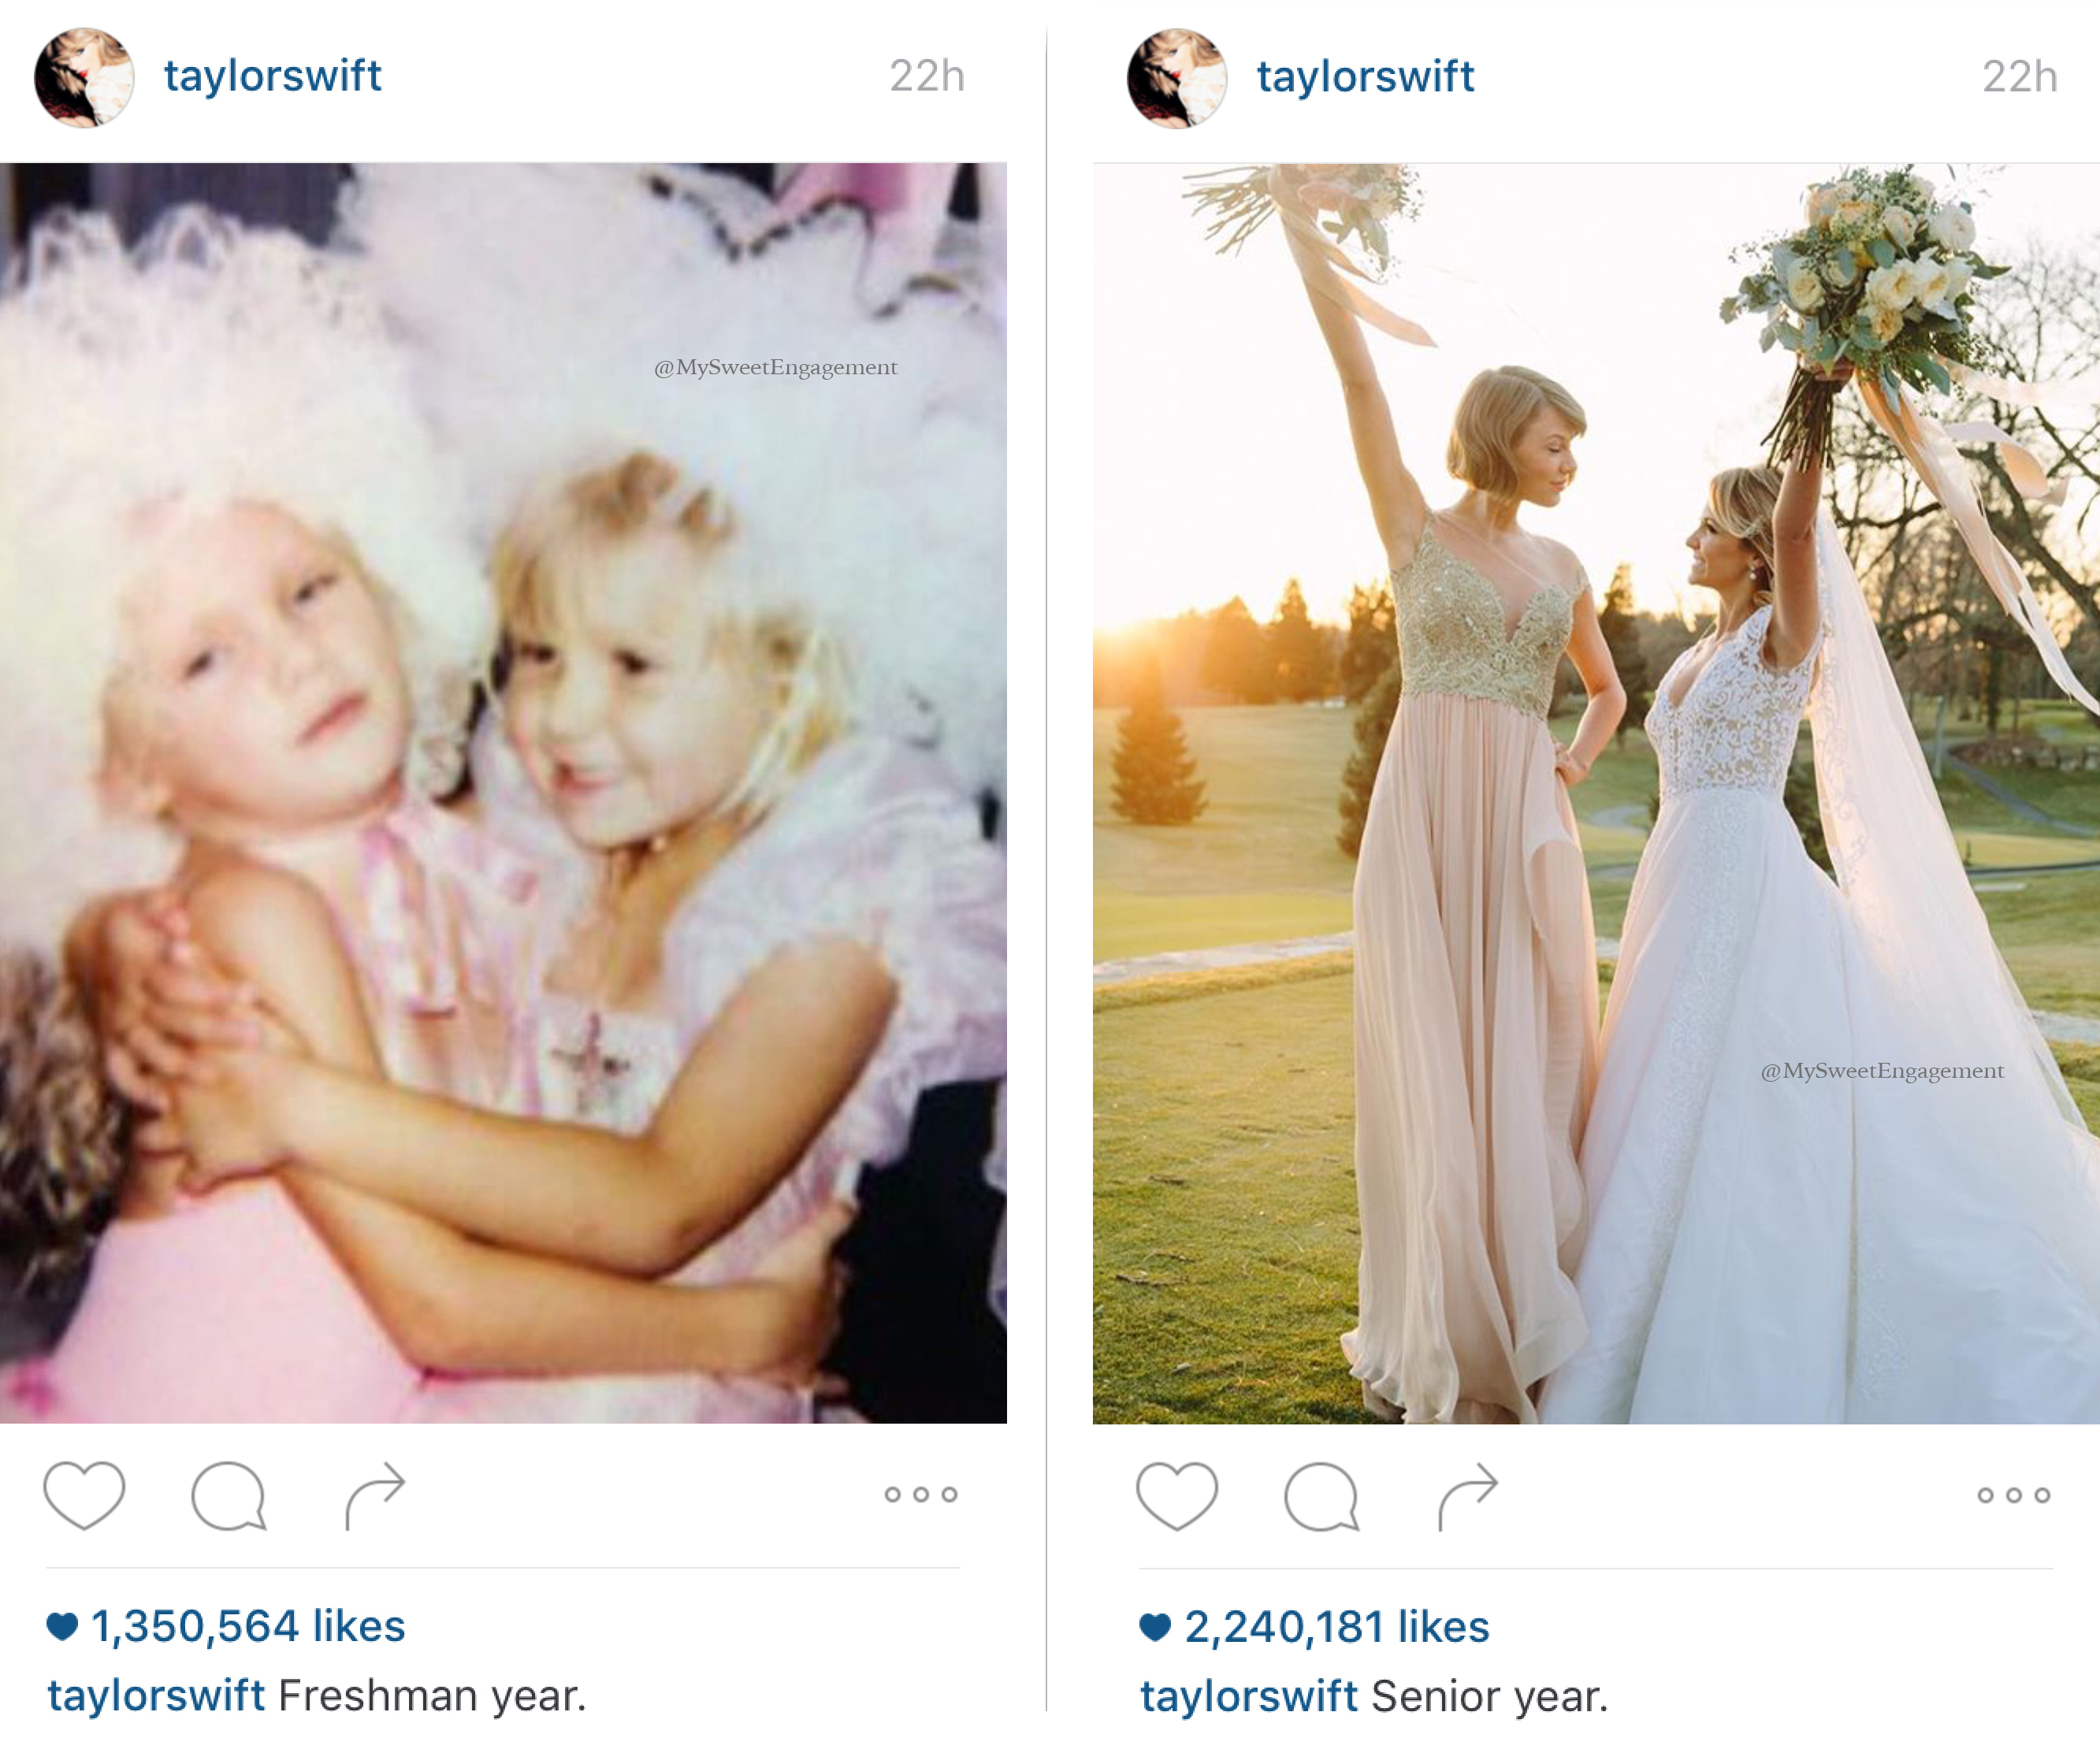 Taylor Swift now and then as maid of honor at her best friend wedding. Bridesmaid dress and bride gown with the bouquets up